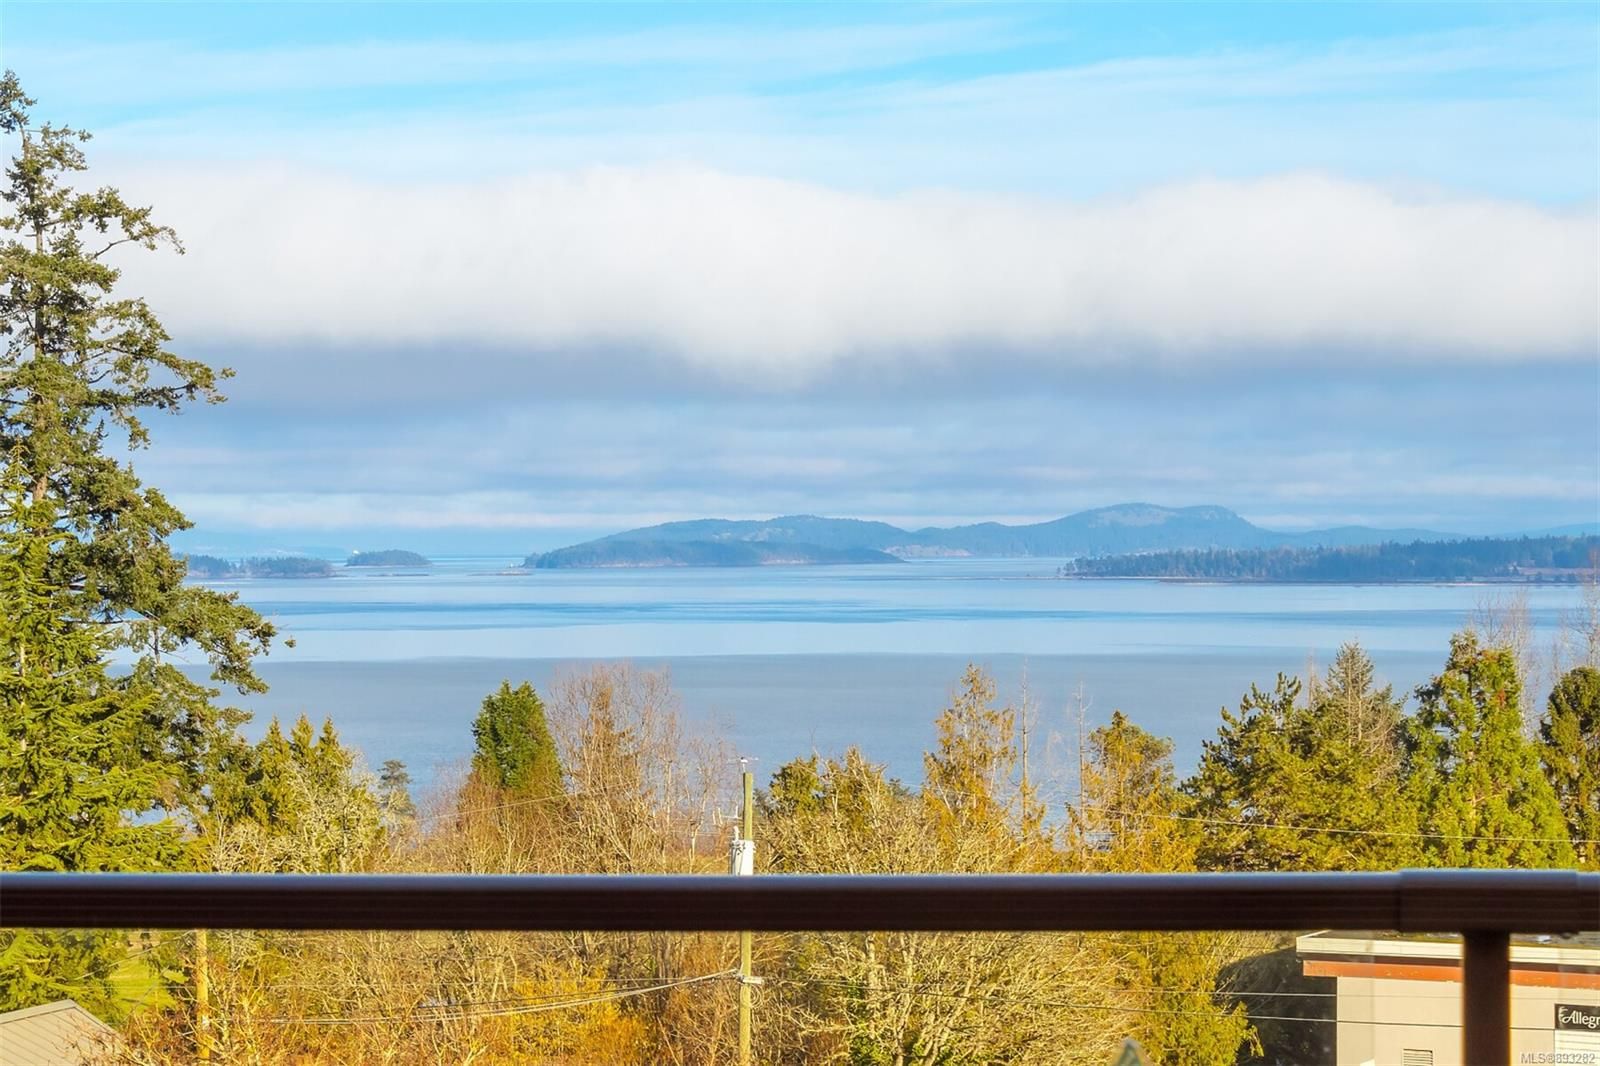 New property listed in NS Bazan Bay, North Saanich